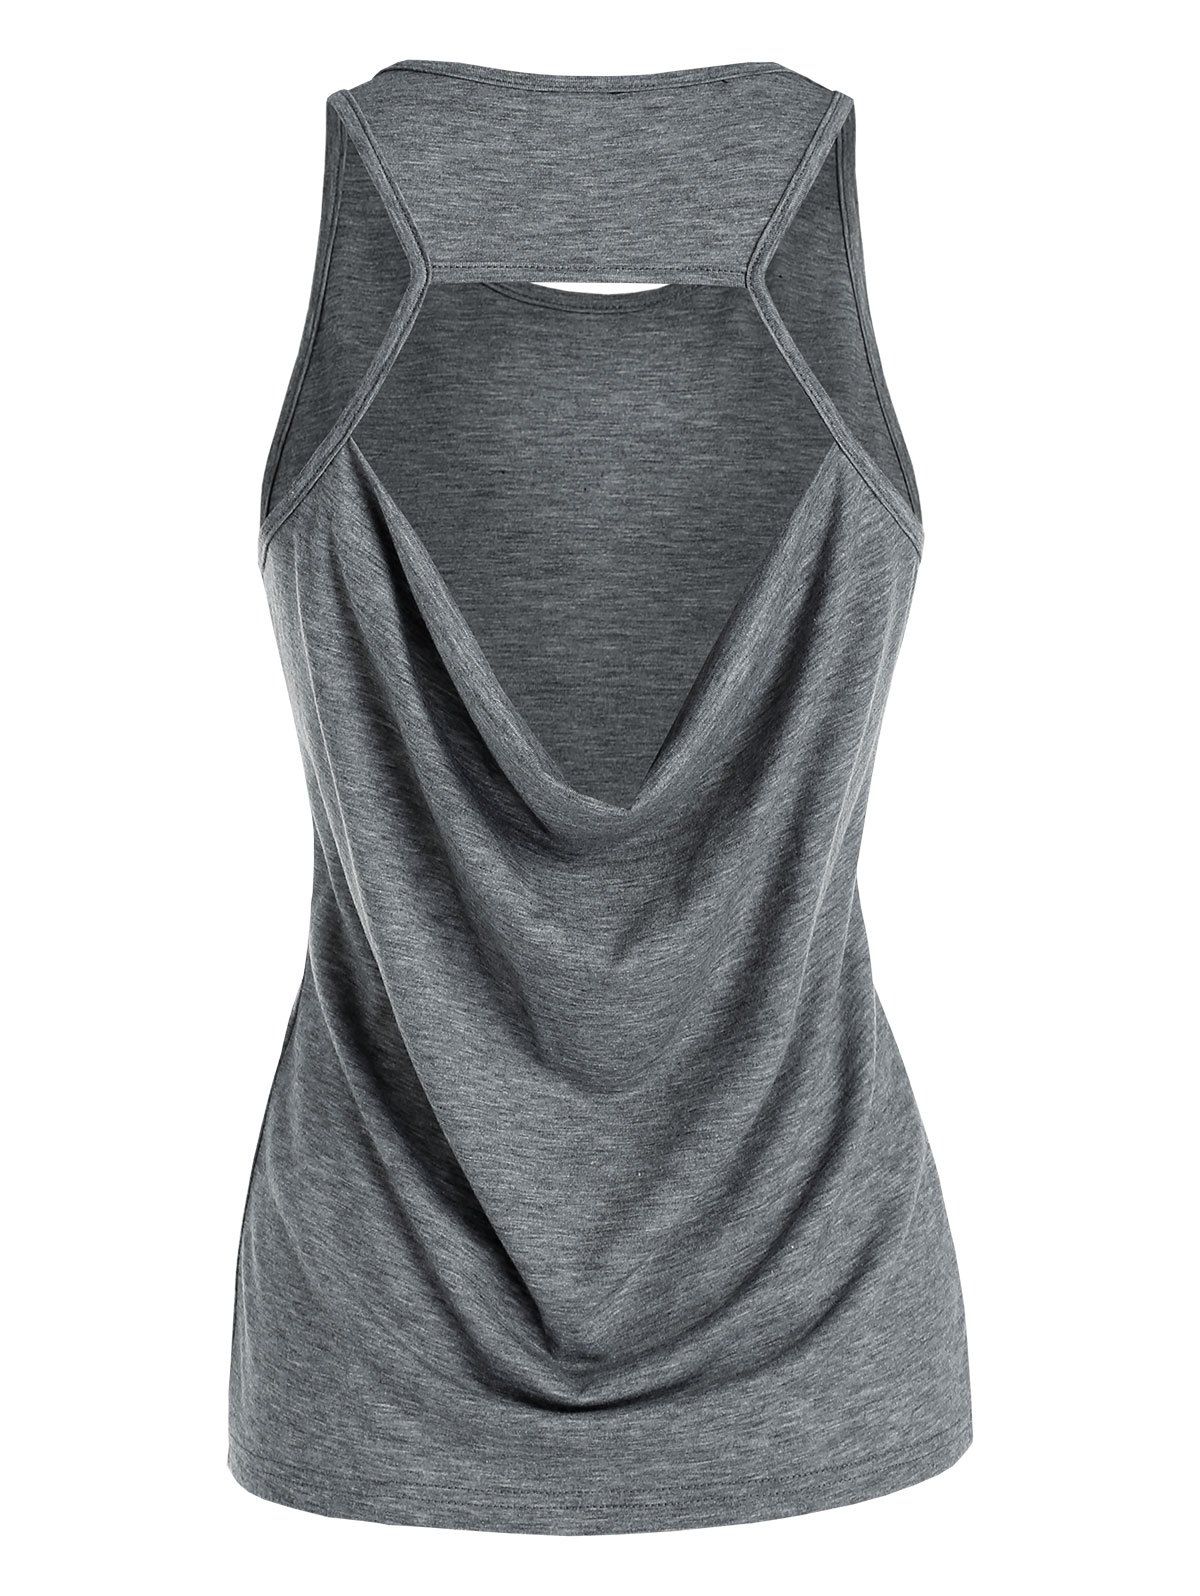 Cut Out Draped Heathered Tank Top - GRAY XL